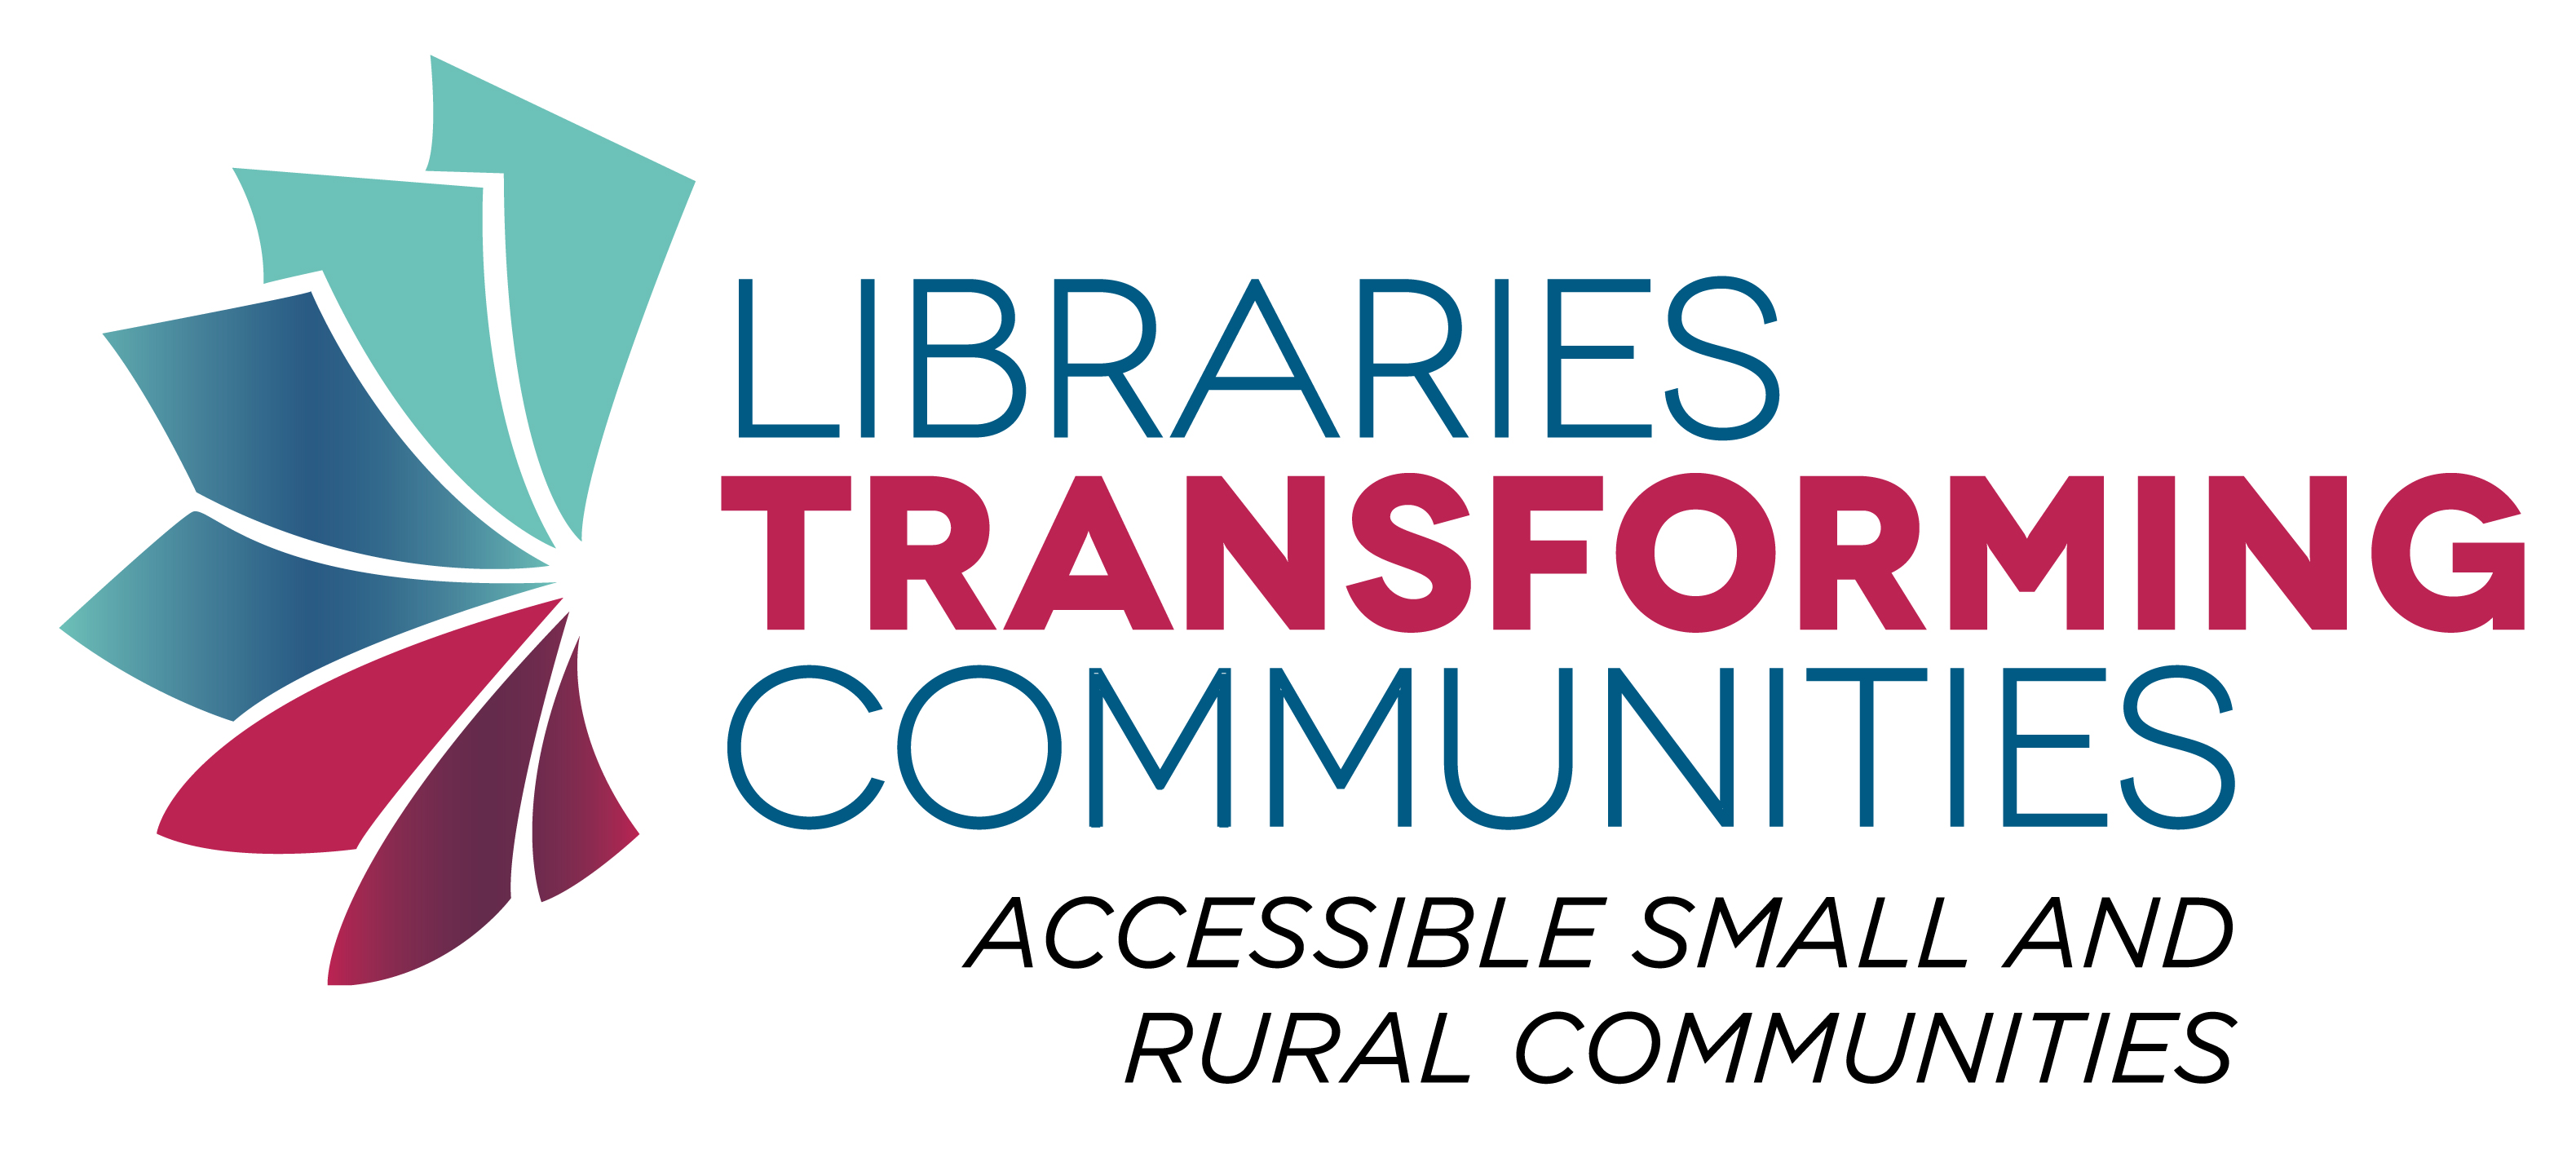 Logo reads: Libraries Transforming Communities: Accessible Small and Rural Libraries